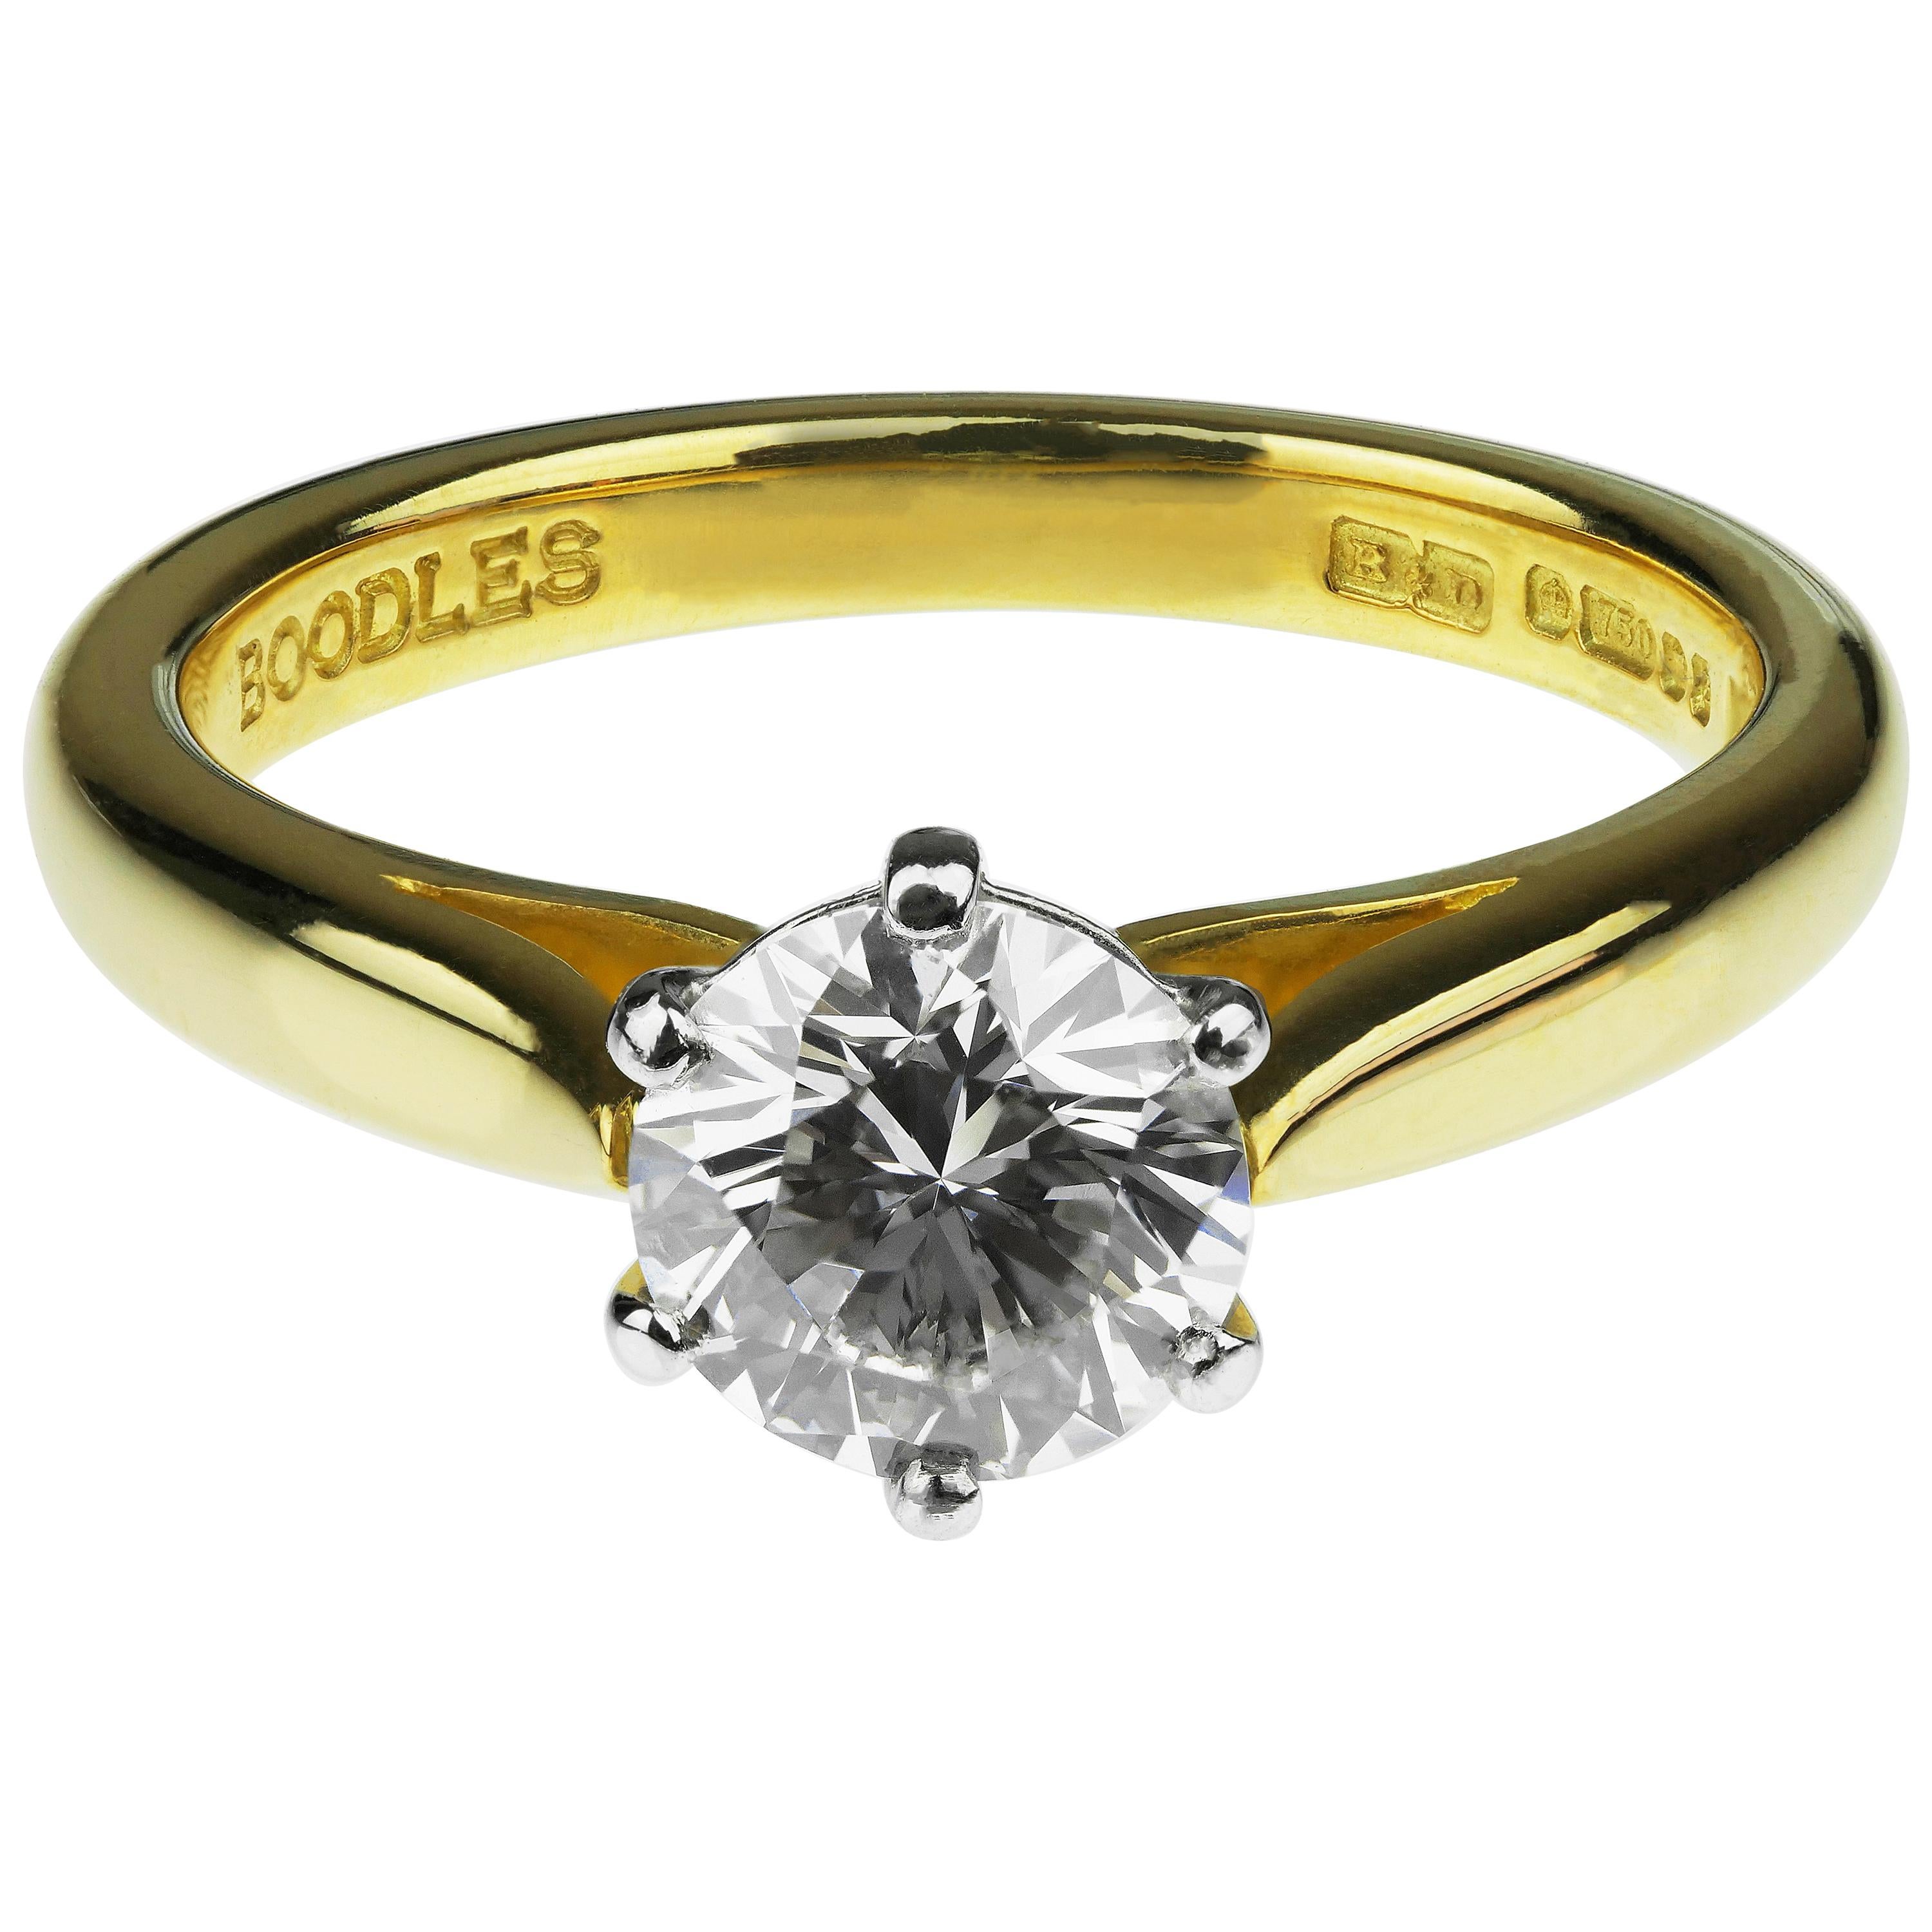 Single Stone, Solitaire Round Diamond 0.75ct Engagement Ring by Boodles